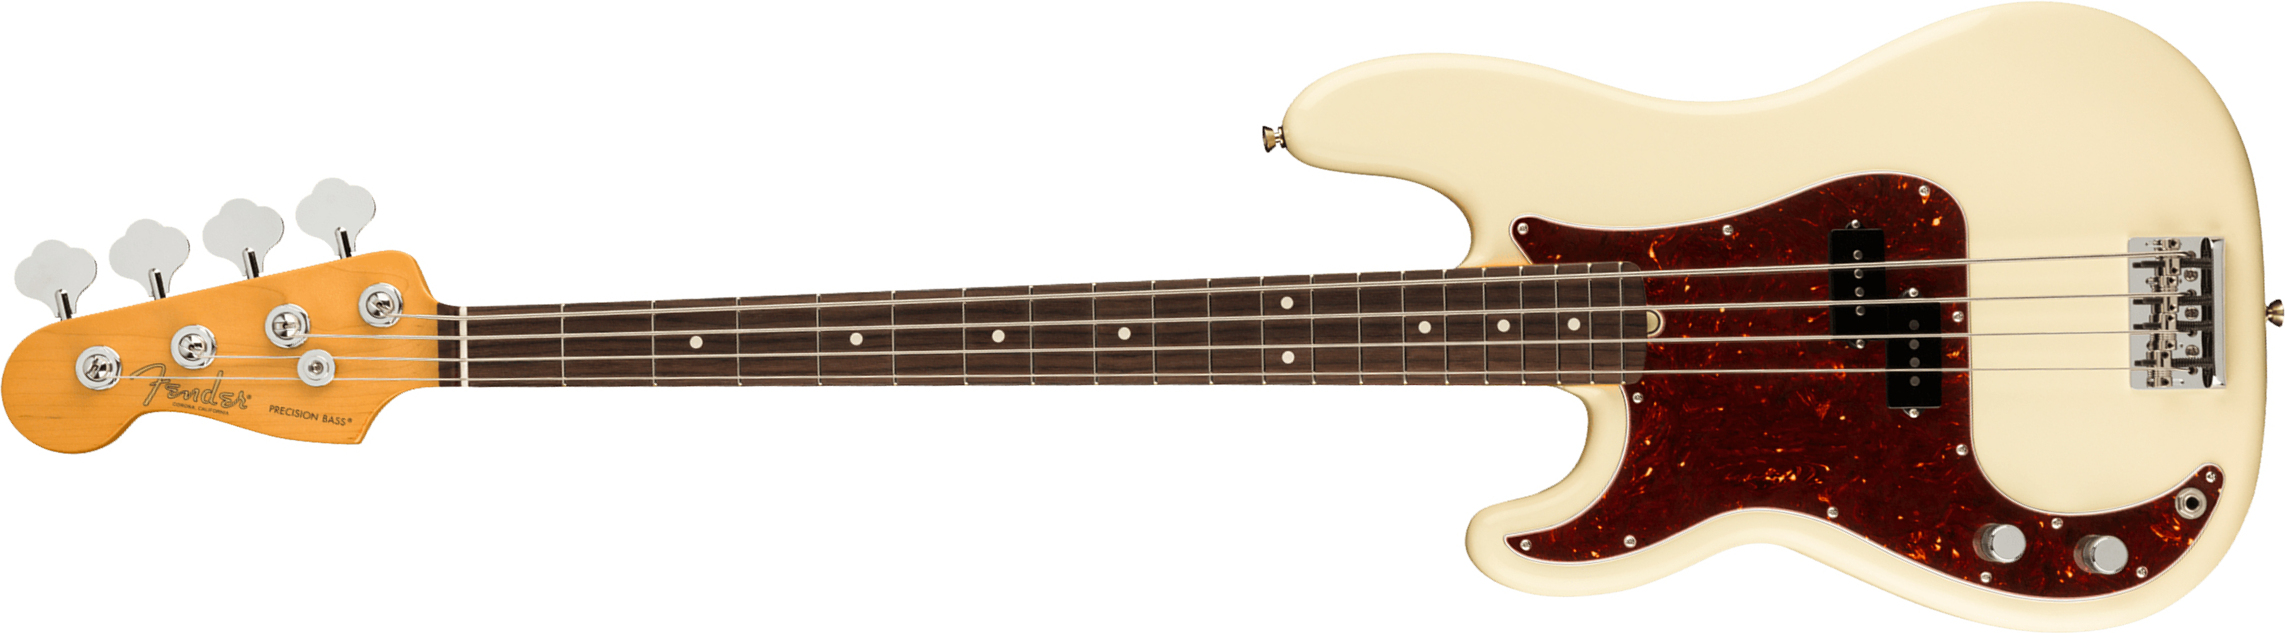 Fender Precision Bass American Professional Ii Lh Gaucher Usa Rw - Olympic White - Basse Électrique Solid Body - Main picture